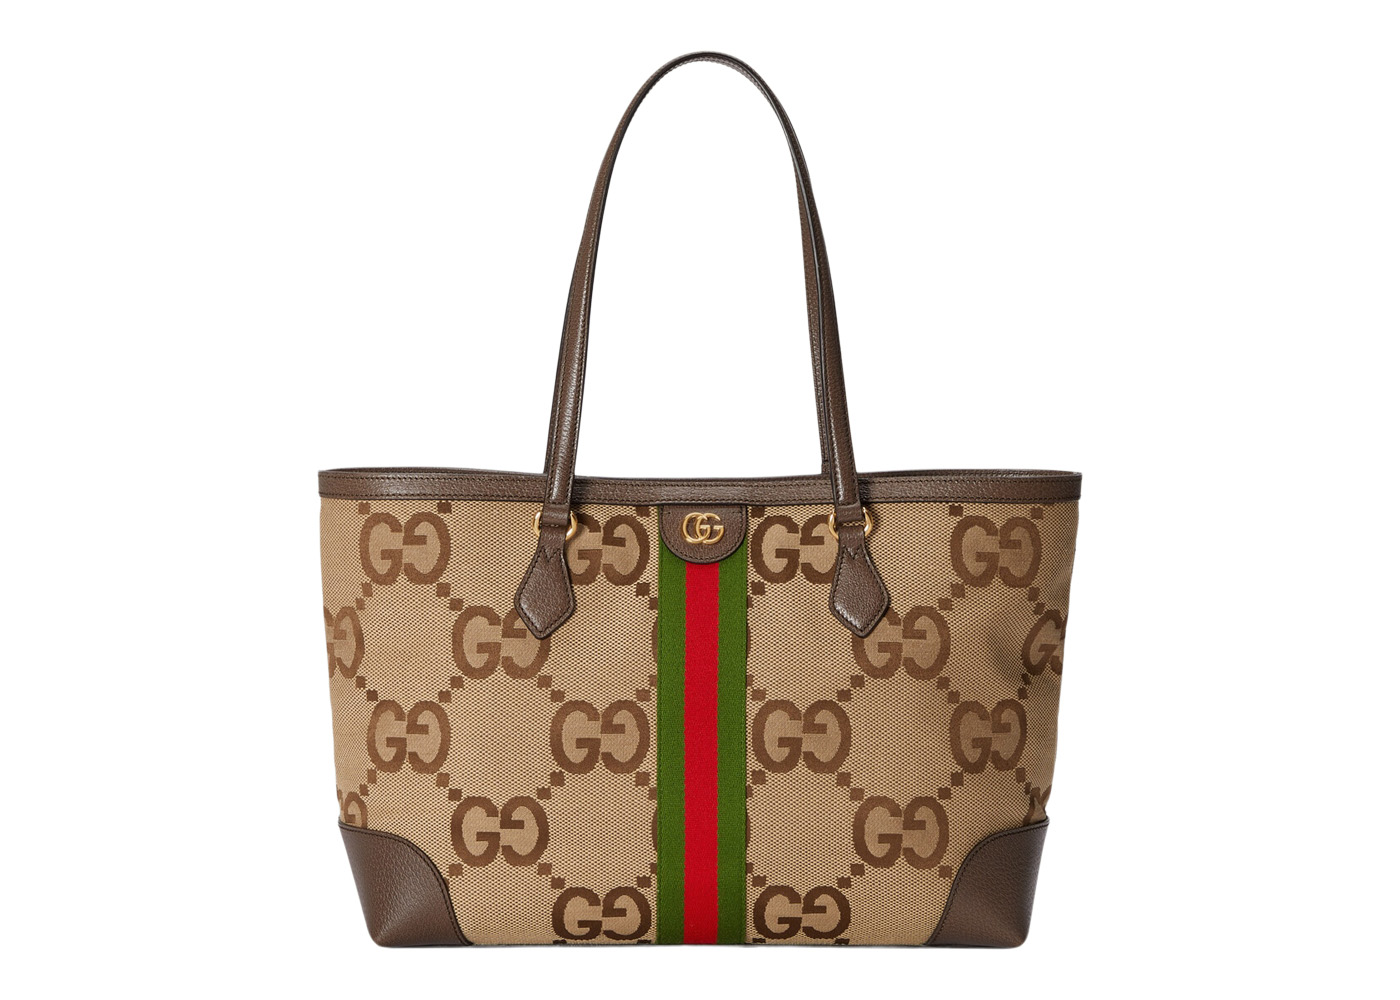 Jumbo GG tote bag in camel and ebony GG Canvas | GUCCI® US